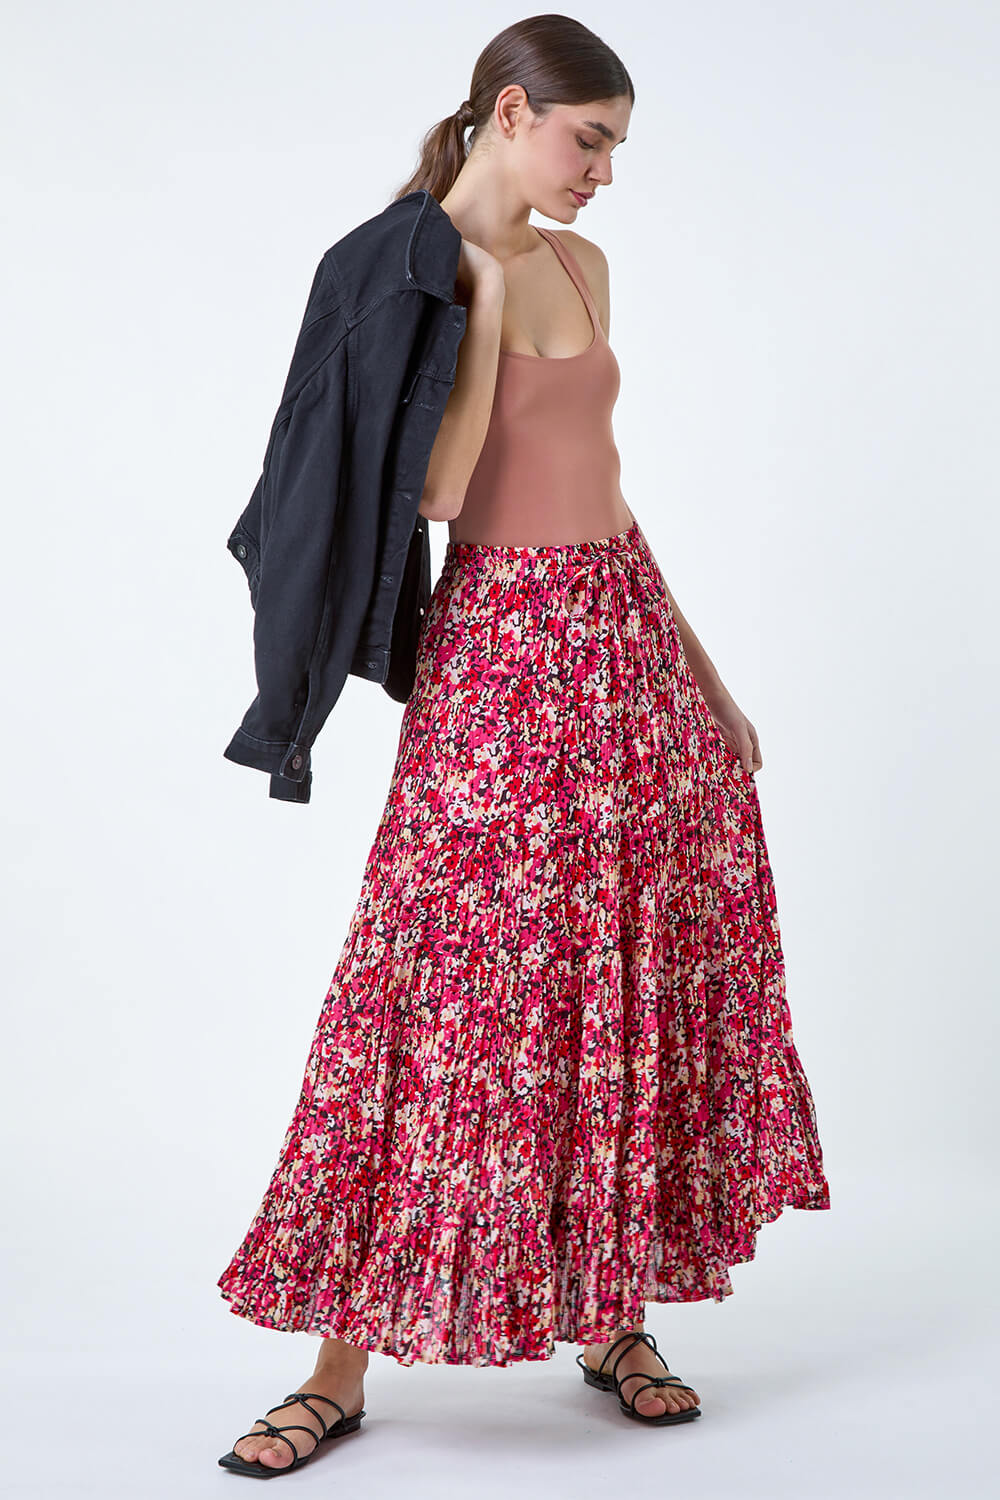 PINK Floral Crinkle Cotton A line Tiered Maxi Skirt, Image 2 of 5